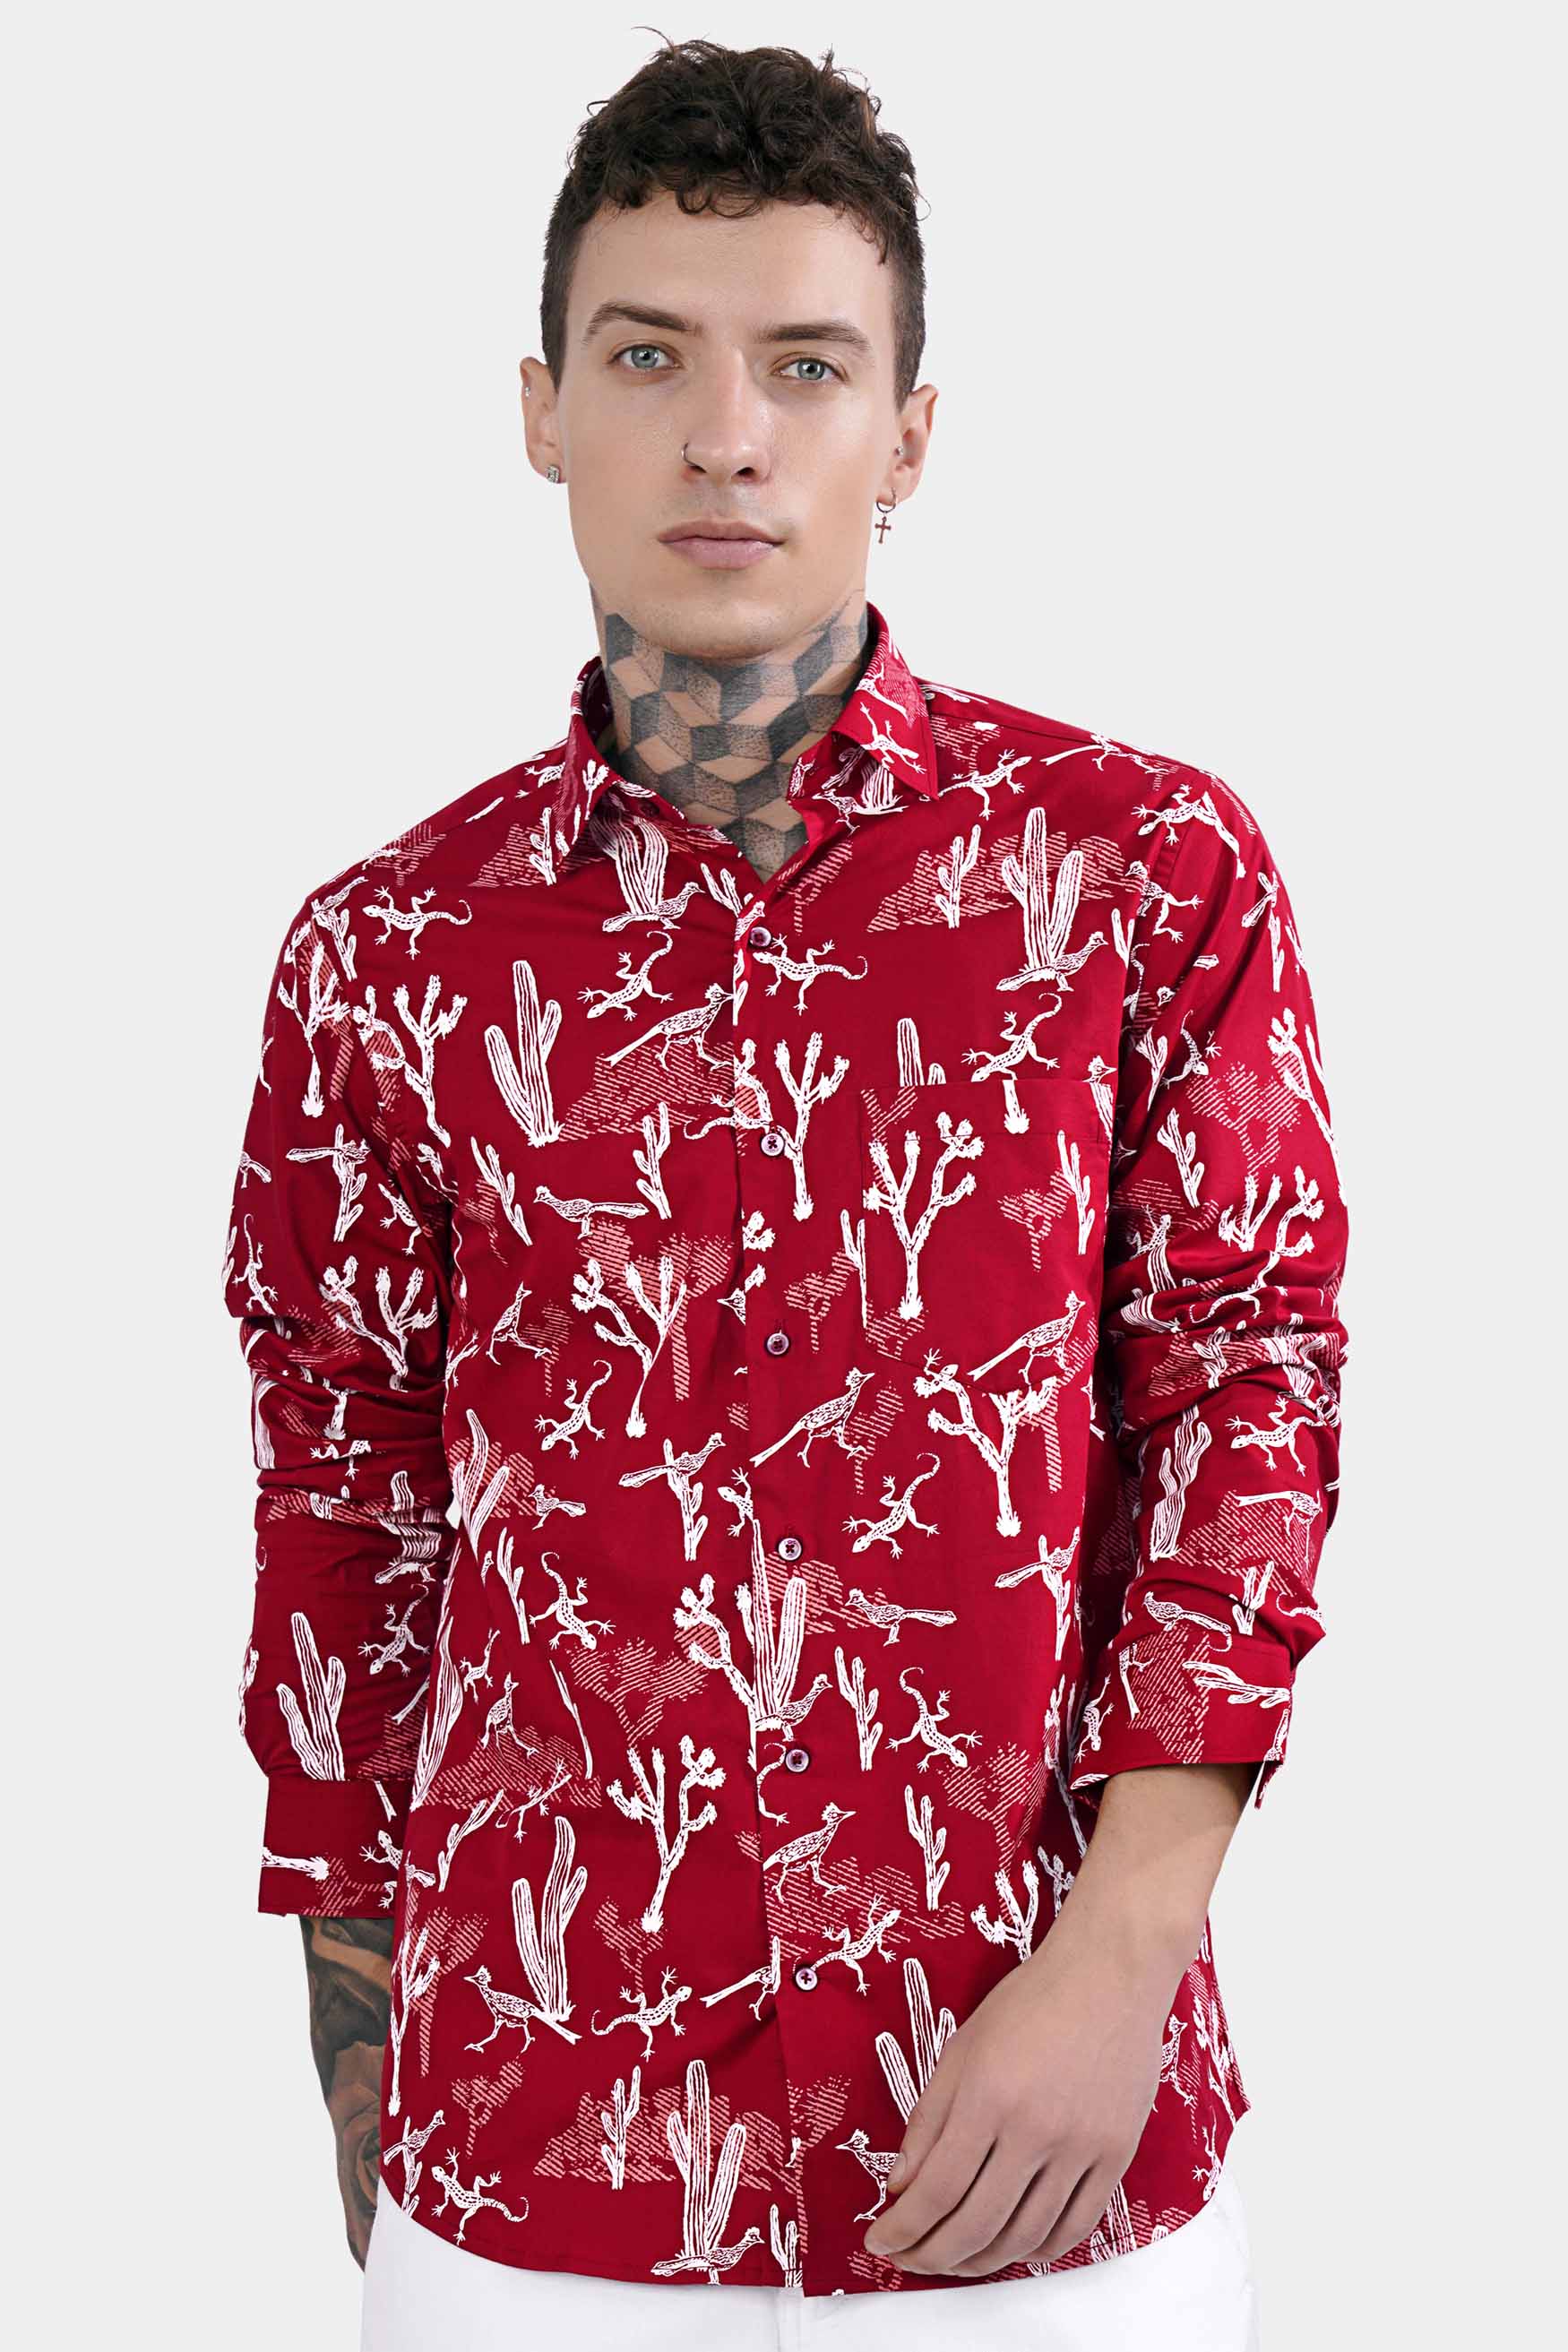 Monarch Red and Bright White Animal Printed Premium Cotton Shirt 11442-RD-38, 11442-RD-H-38, 11442-RD-39, 11442-RD-H-39, 11442-RD-40, 11442-RD-H-40, 11442-RD-42, 11442-RD-H-42, 11442-RD-44, 11442-RD-H-44, 11442-RD-46, 11442-RD-H-46, 11442-RD-48, 11442-RD-H-48, 11442-RD-50, 11442-RD-H-50, 11442-RD-52, 11442-RD-H-52